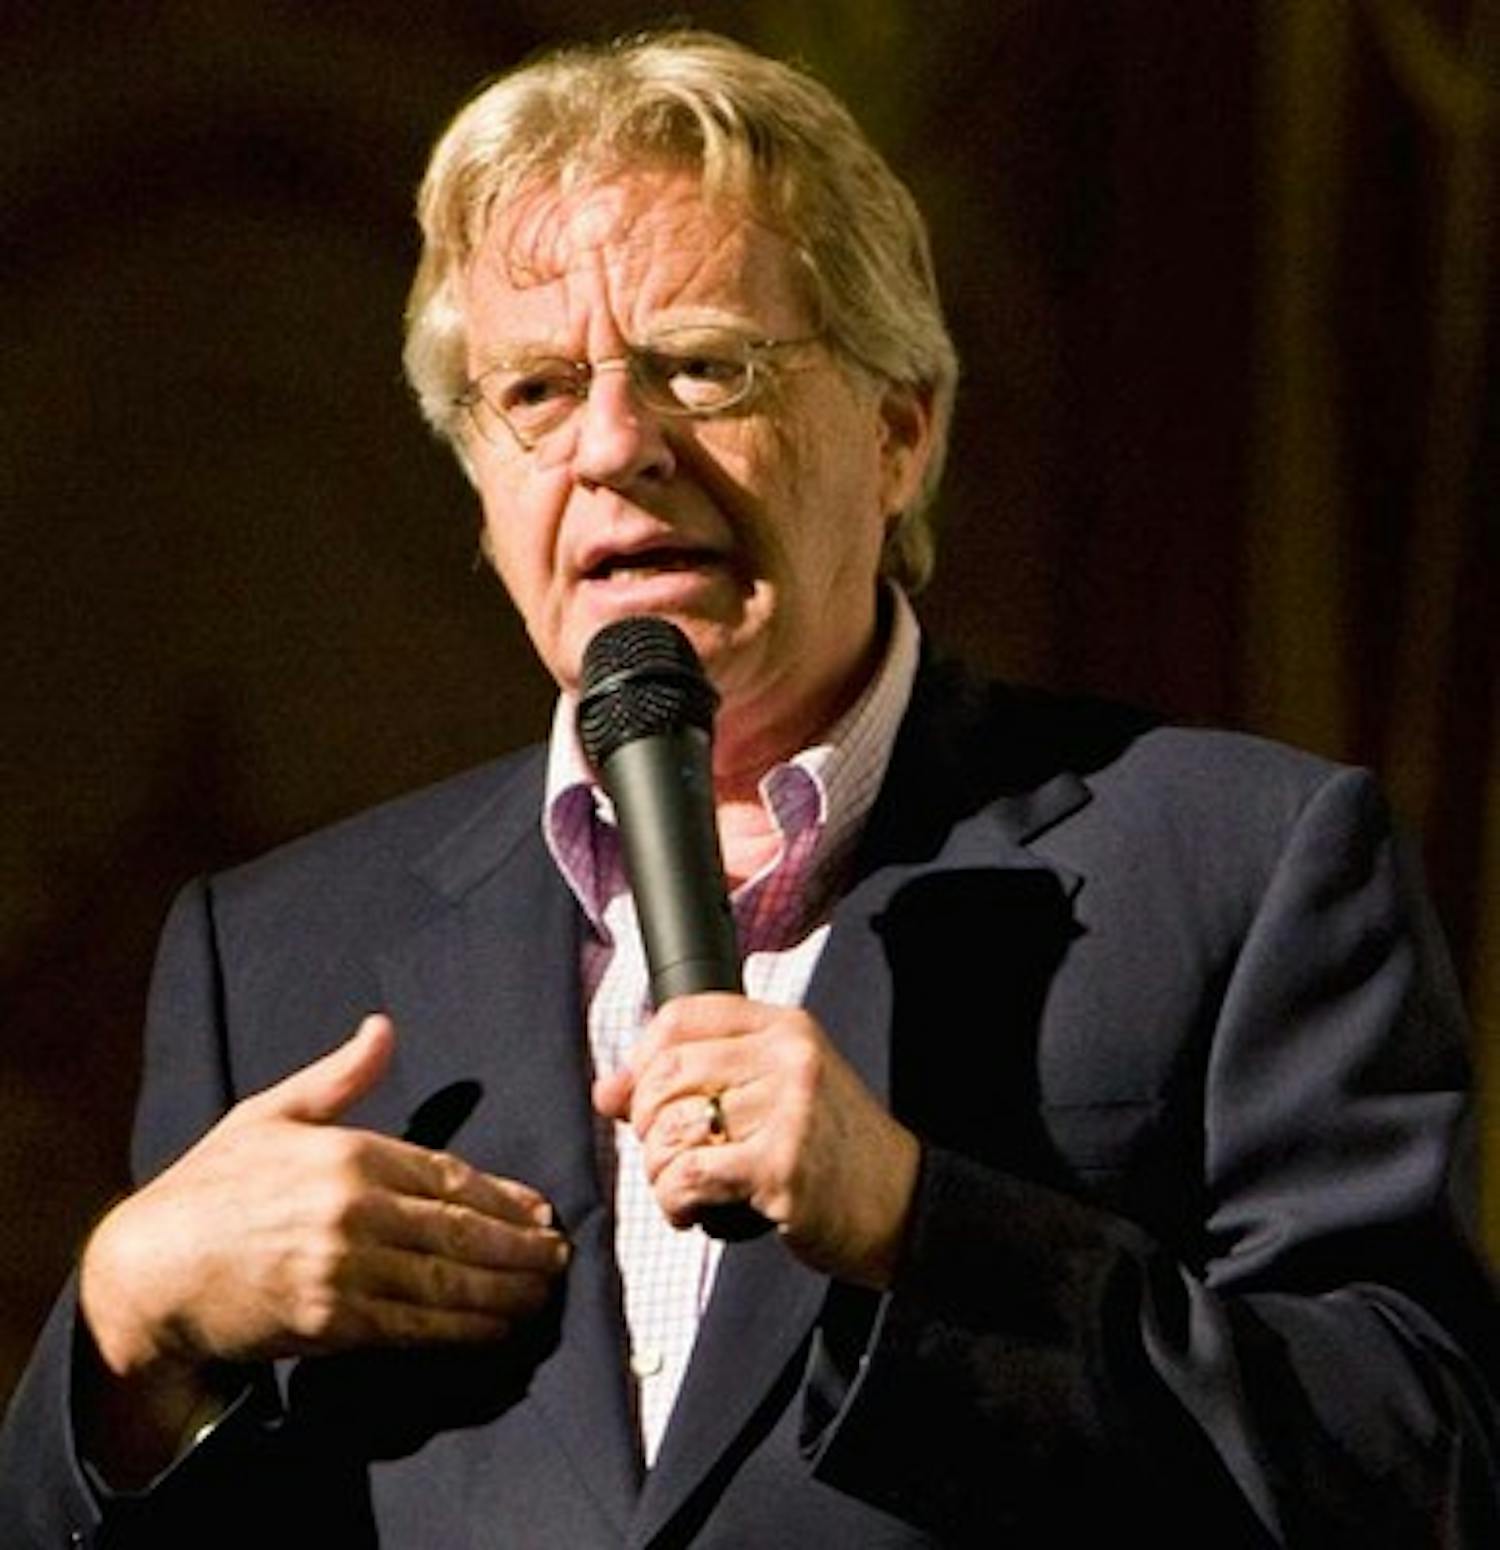 Jerry Springer advocates free speech, health care to students